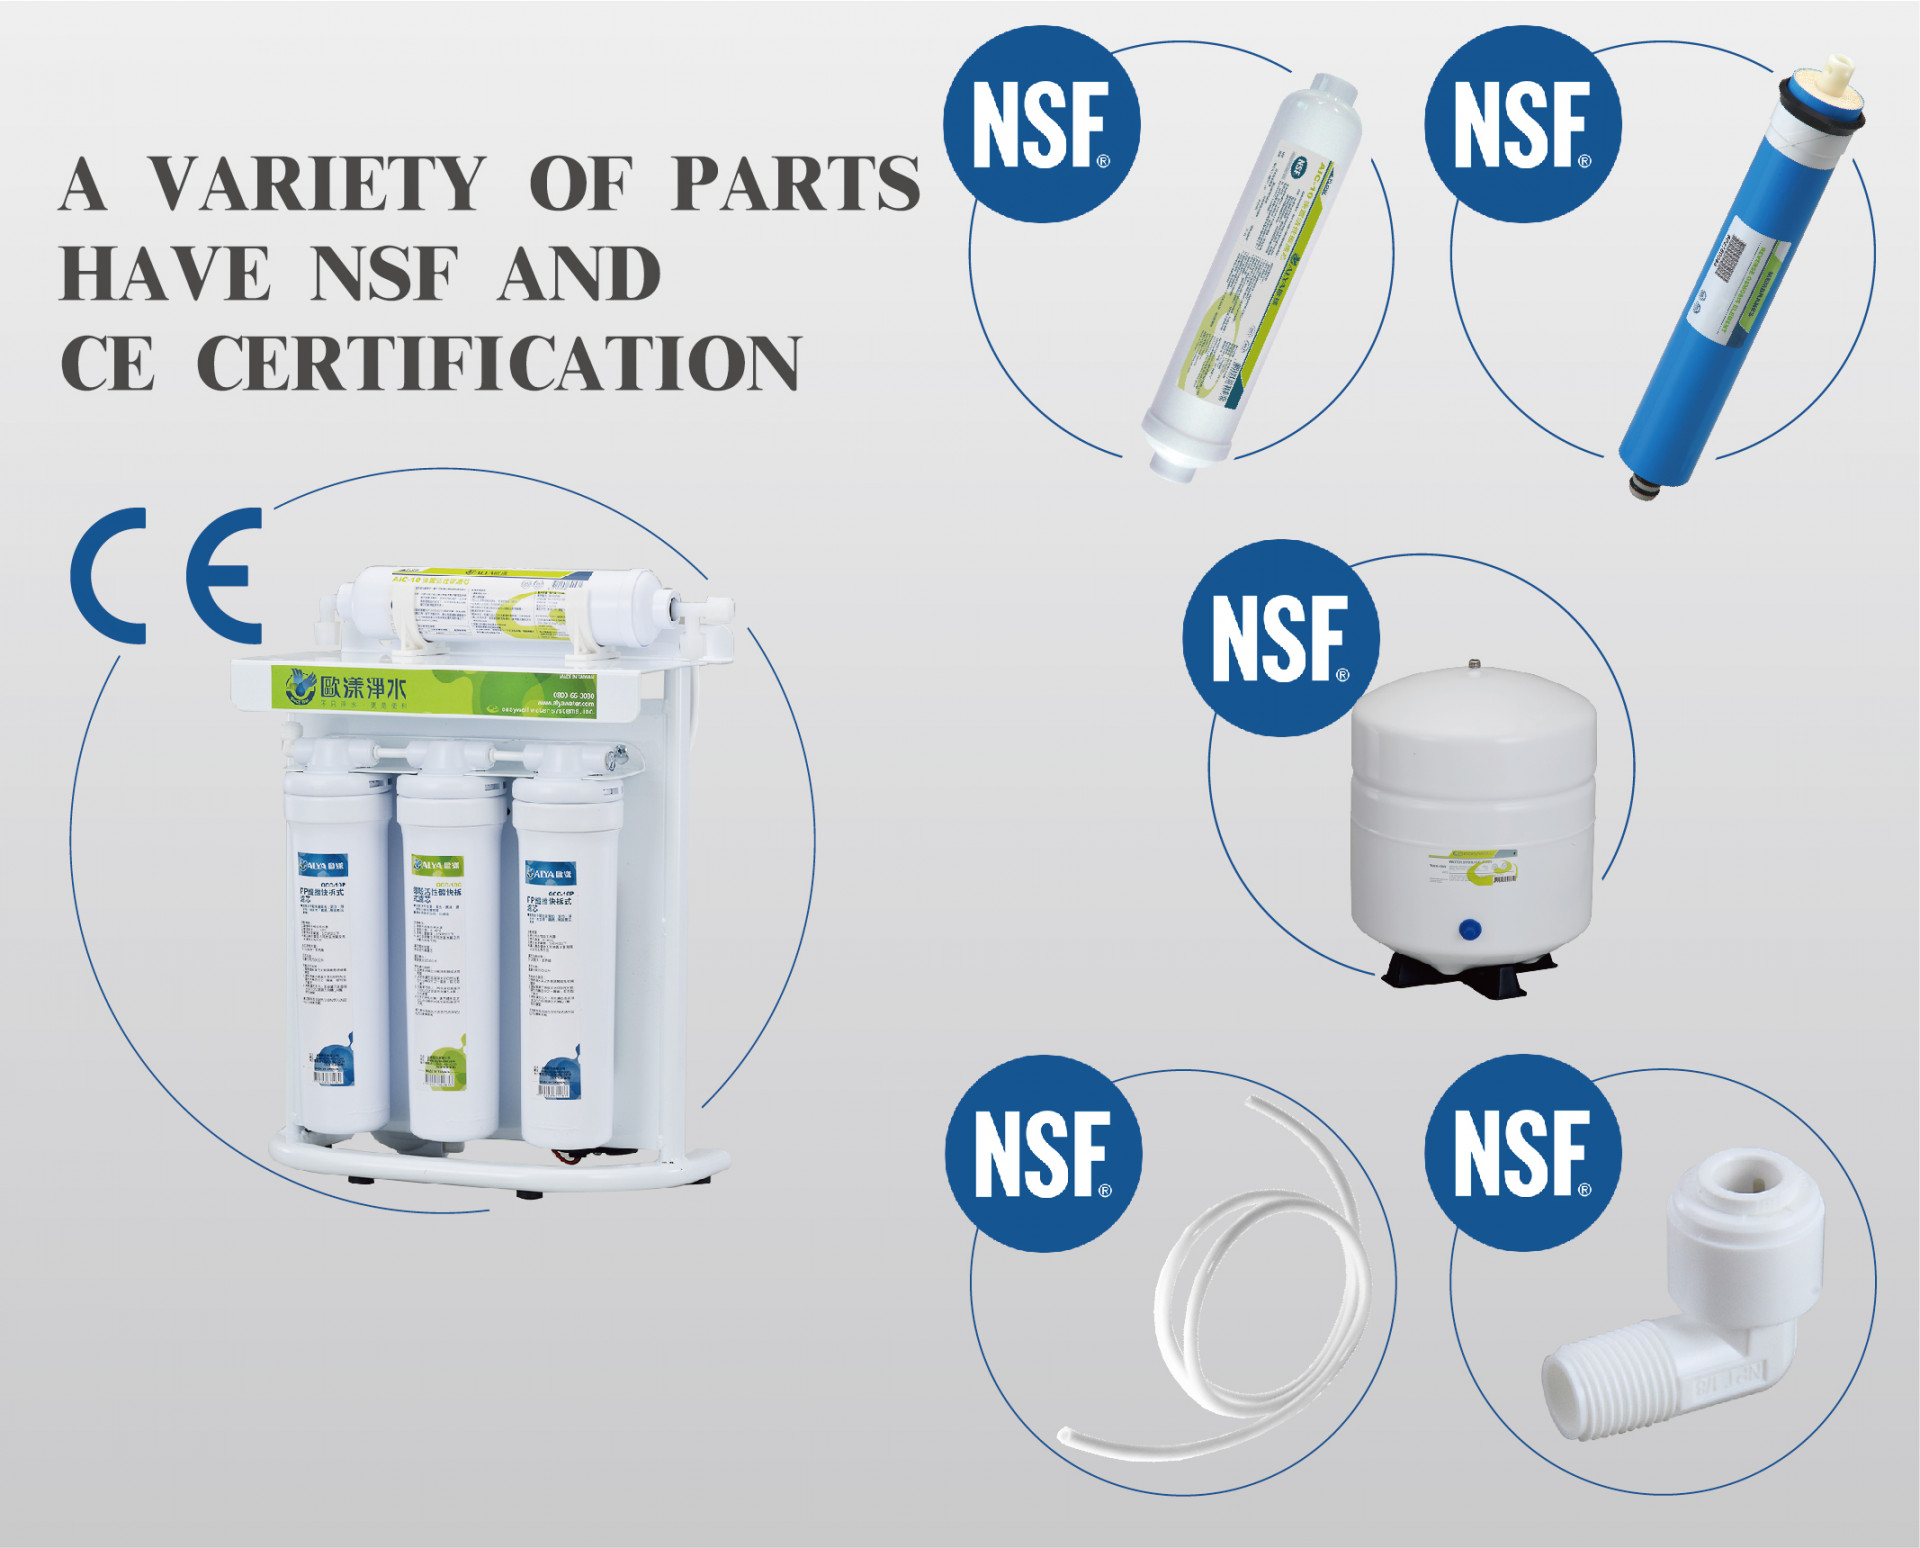 RO SYSTEM A VARIETY OF PARTS HAVE NSF AND CE CERTIFICATION